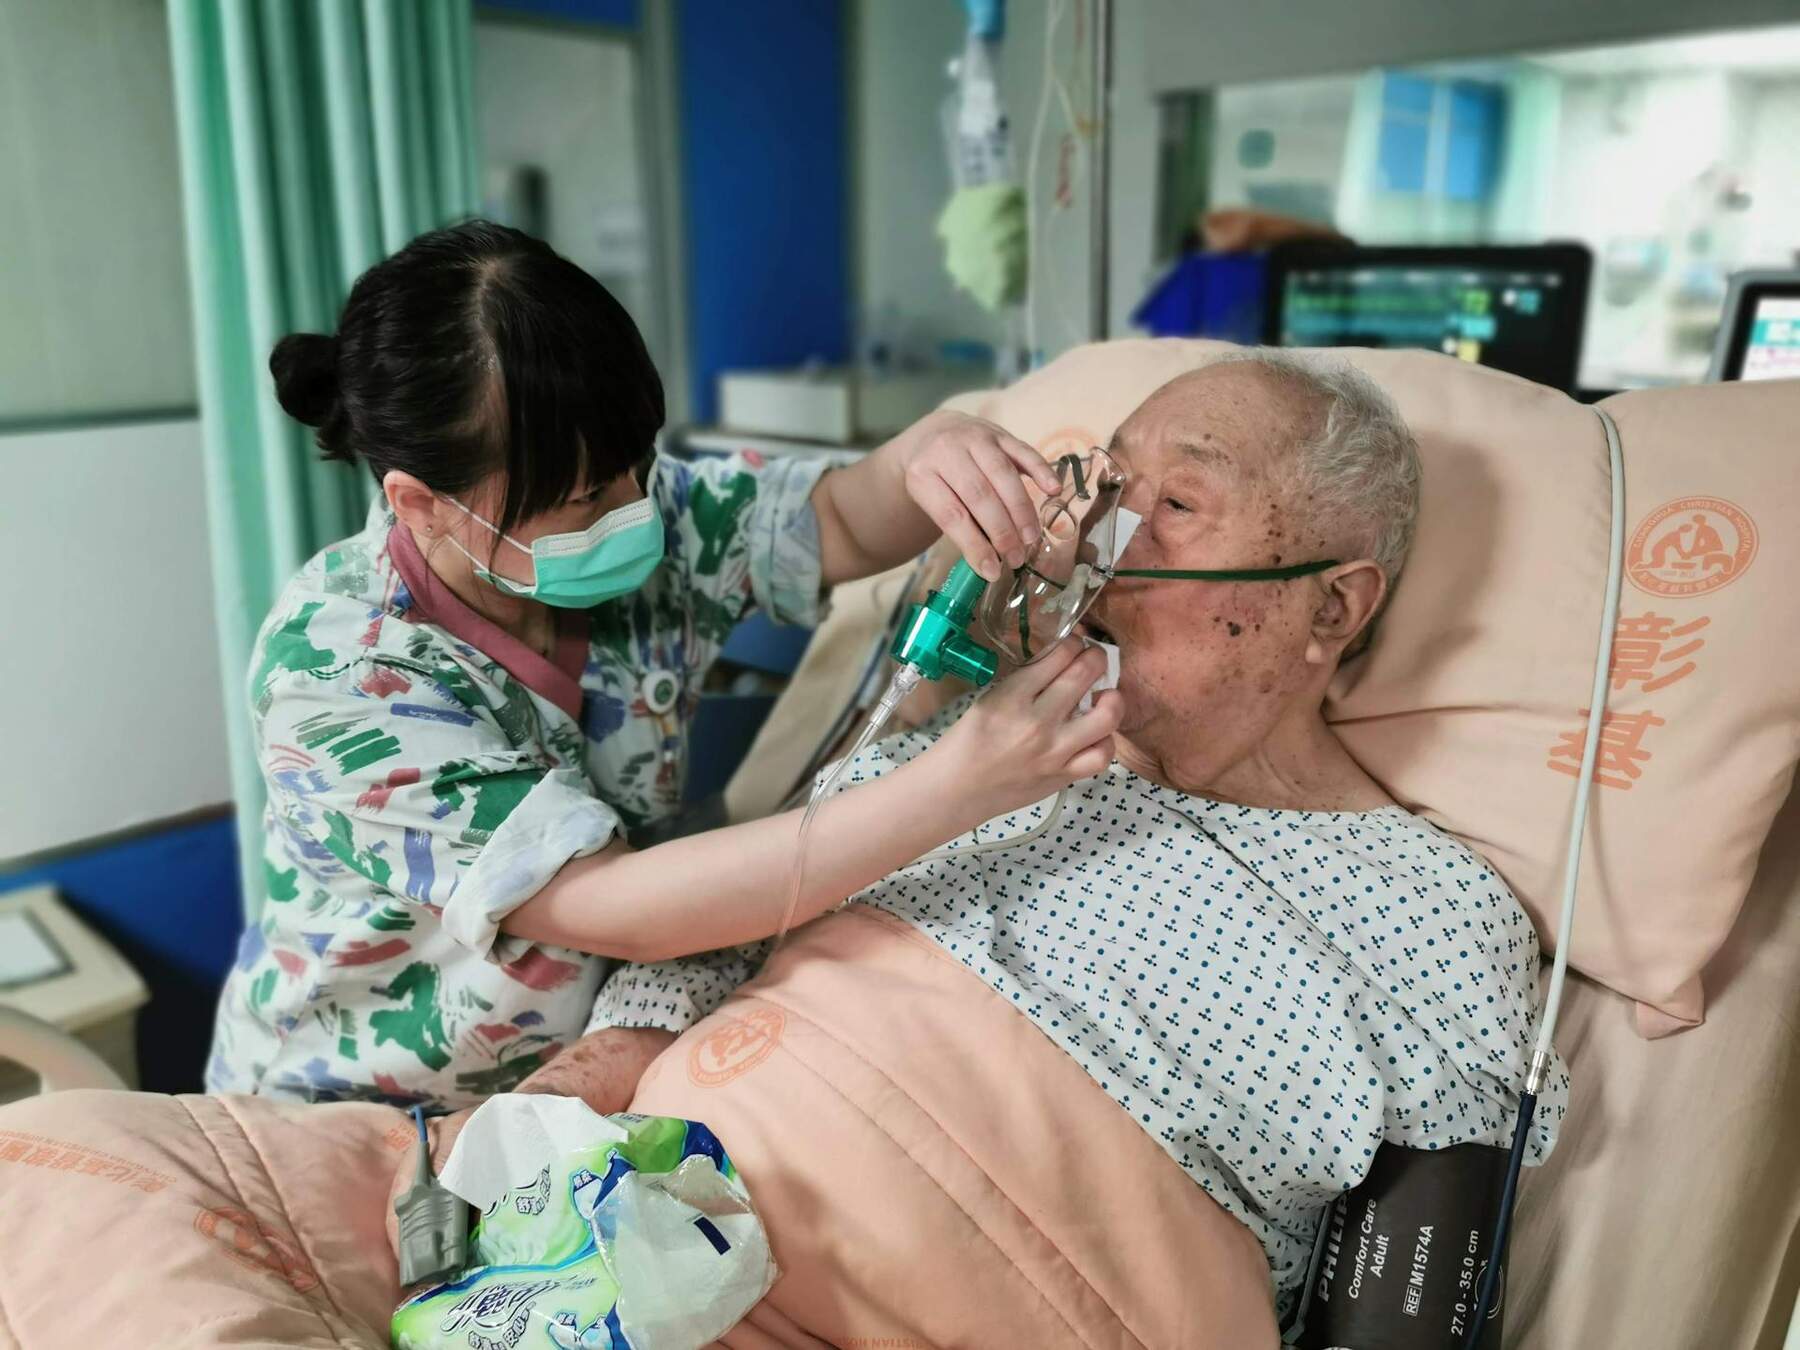 An elderly man receiving oxygen from a nurse in a medical facility